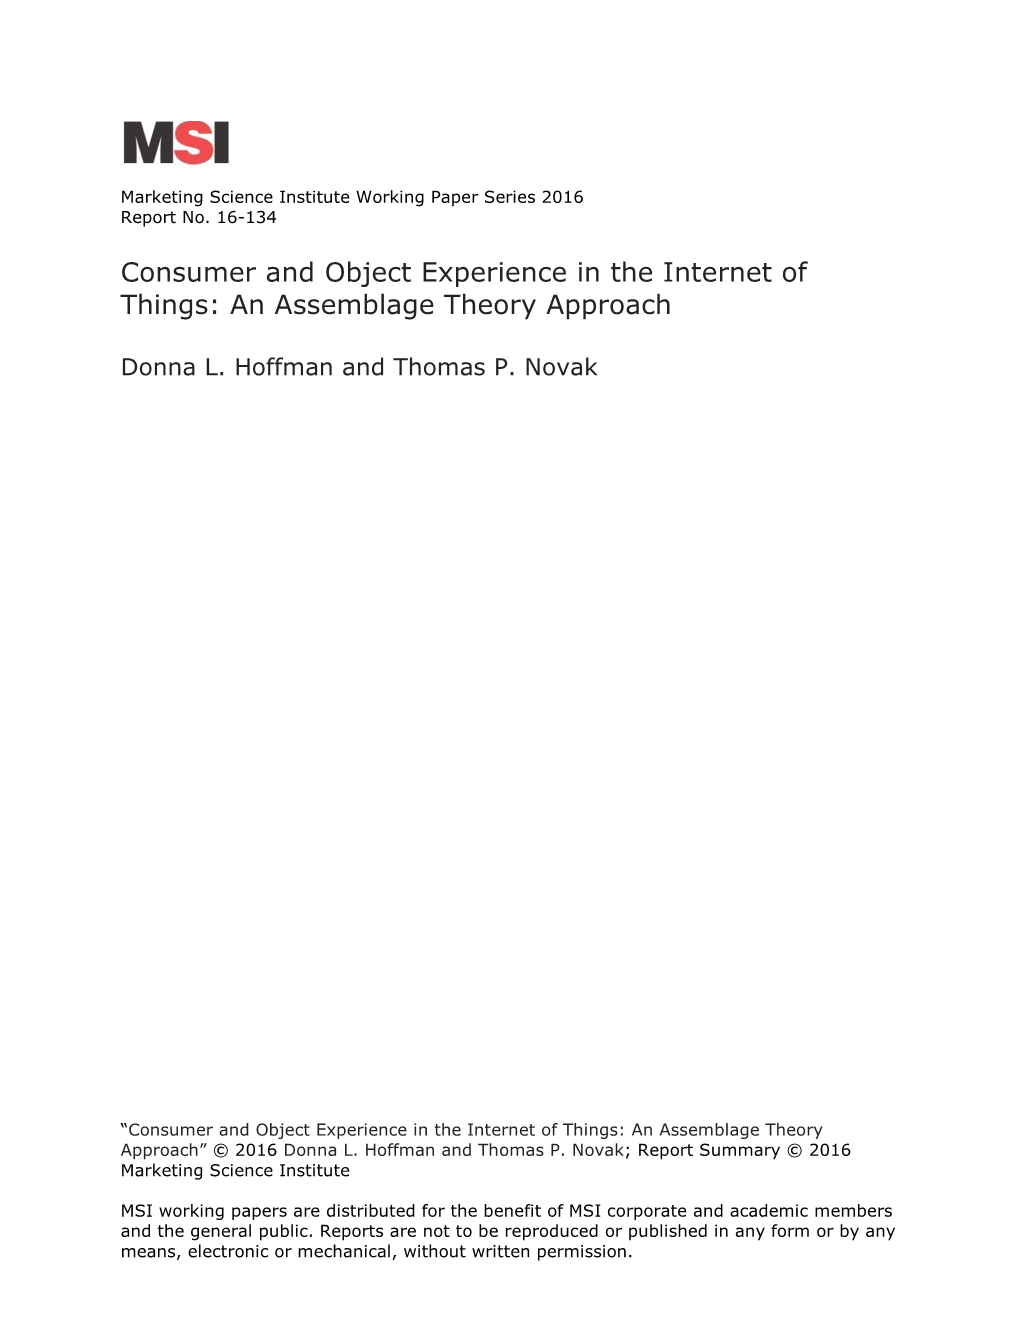 Consumer and Object Experience in the Internet of Things: an Assemblage Theory Approach